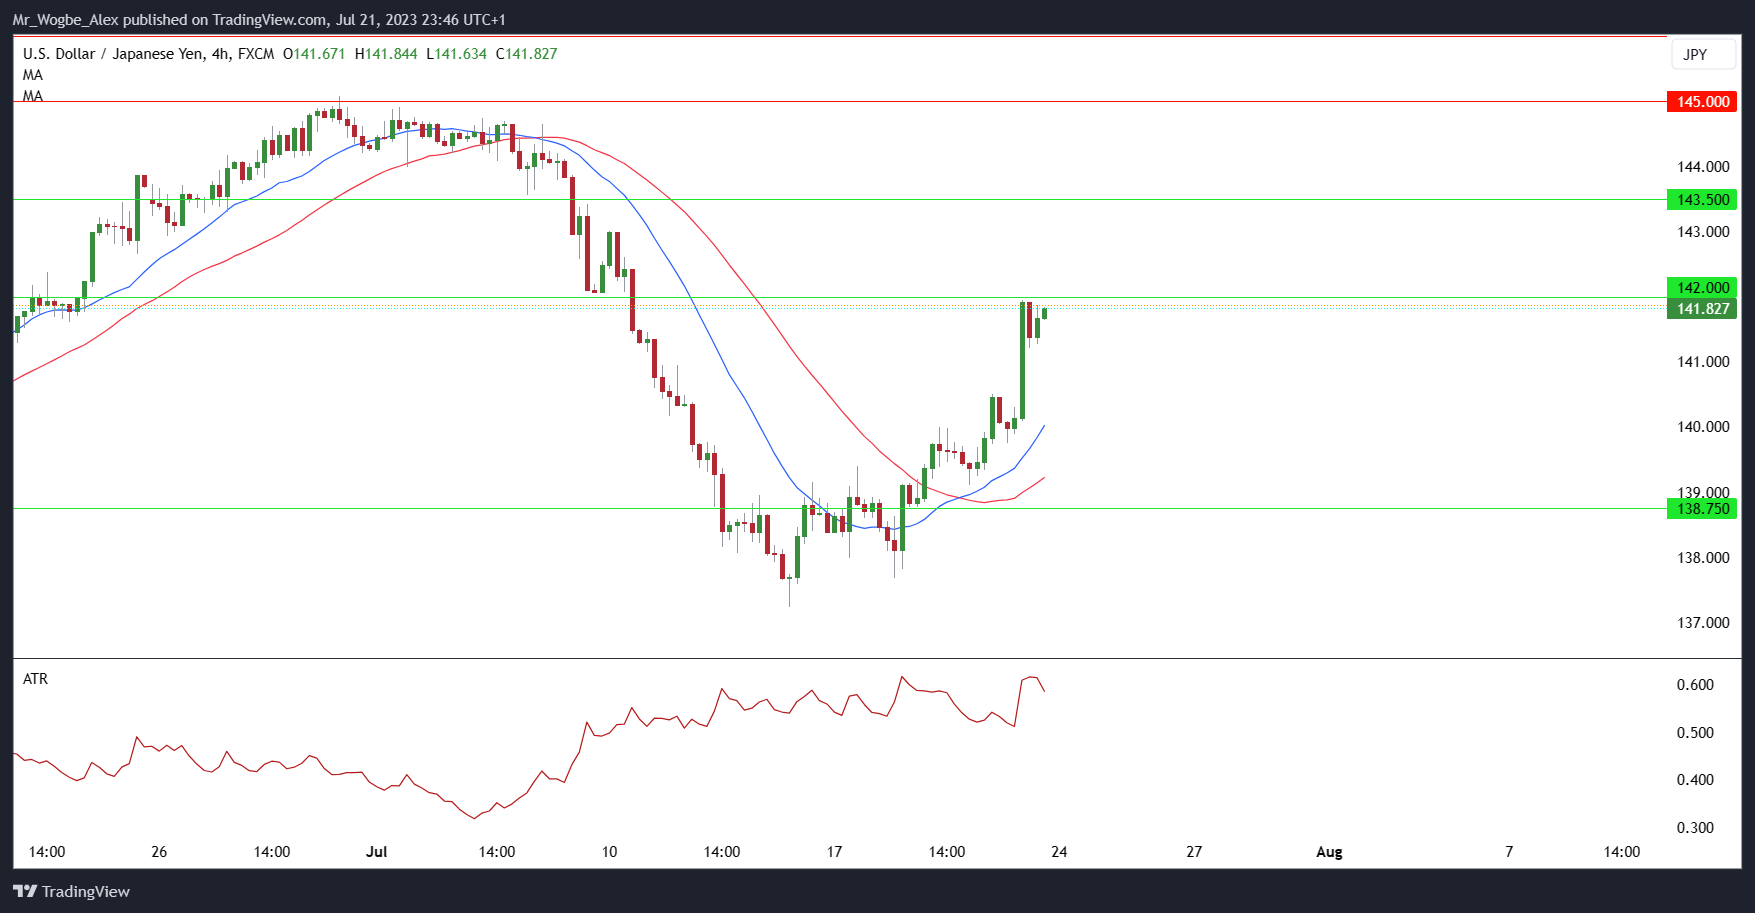 USD/JPY 4-Hour Chart from TradingView